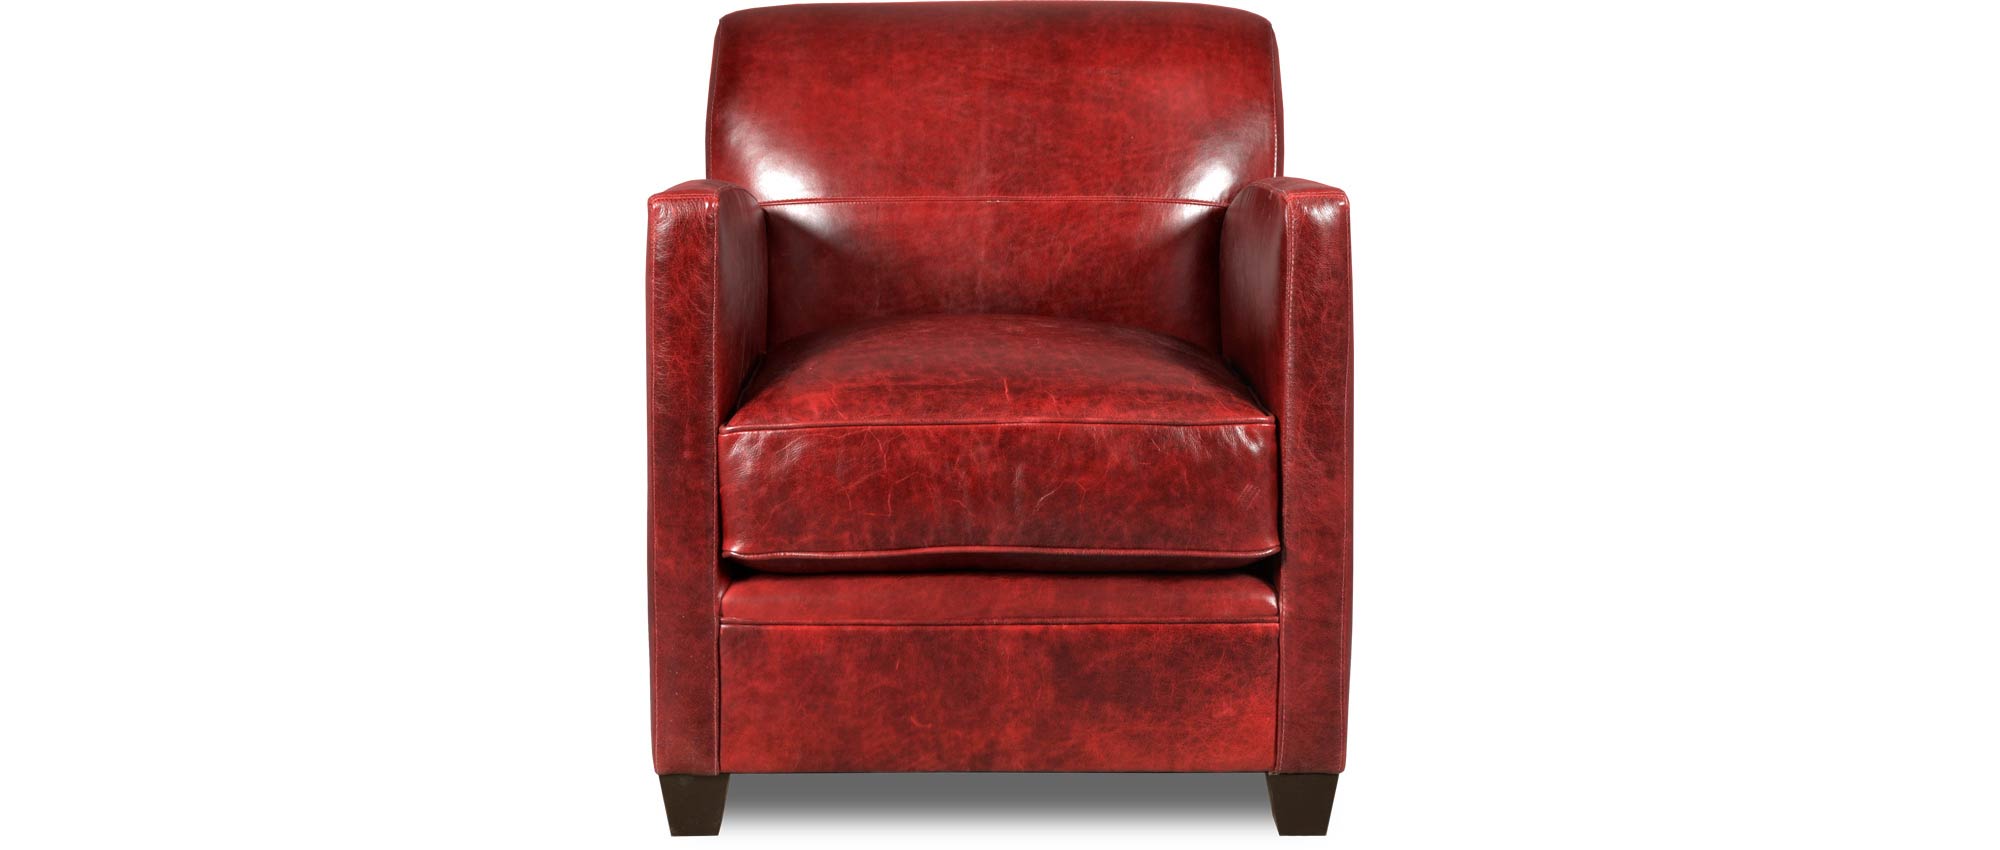 Pegeen armchair in Caprieze Salute Red leather